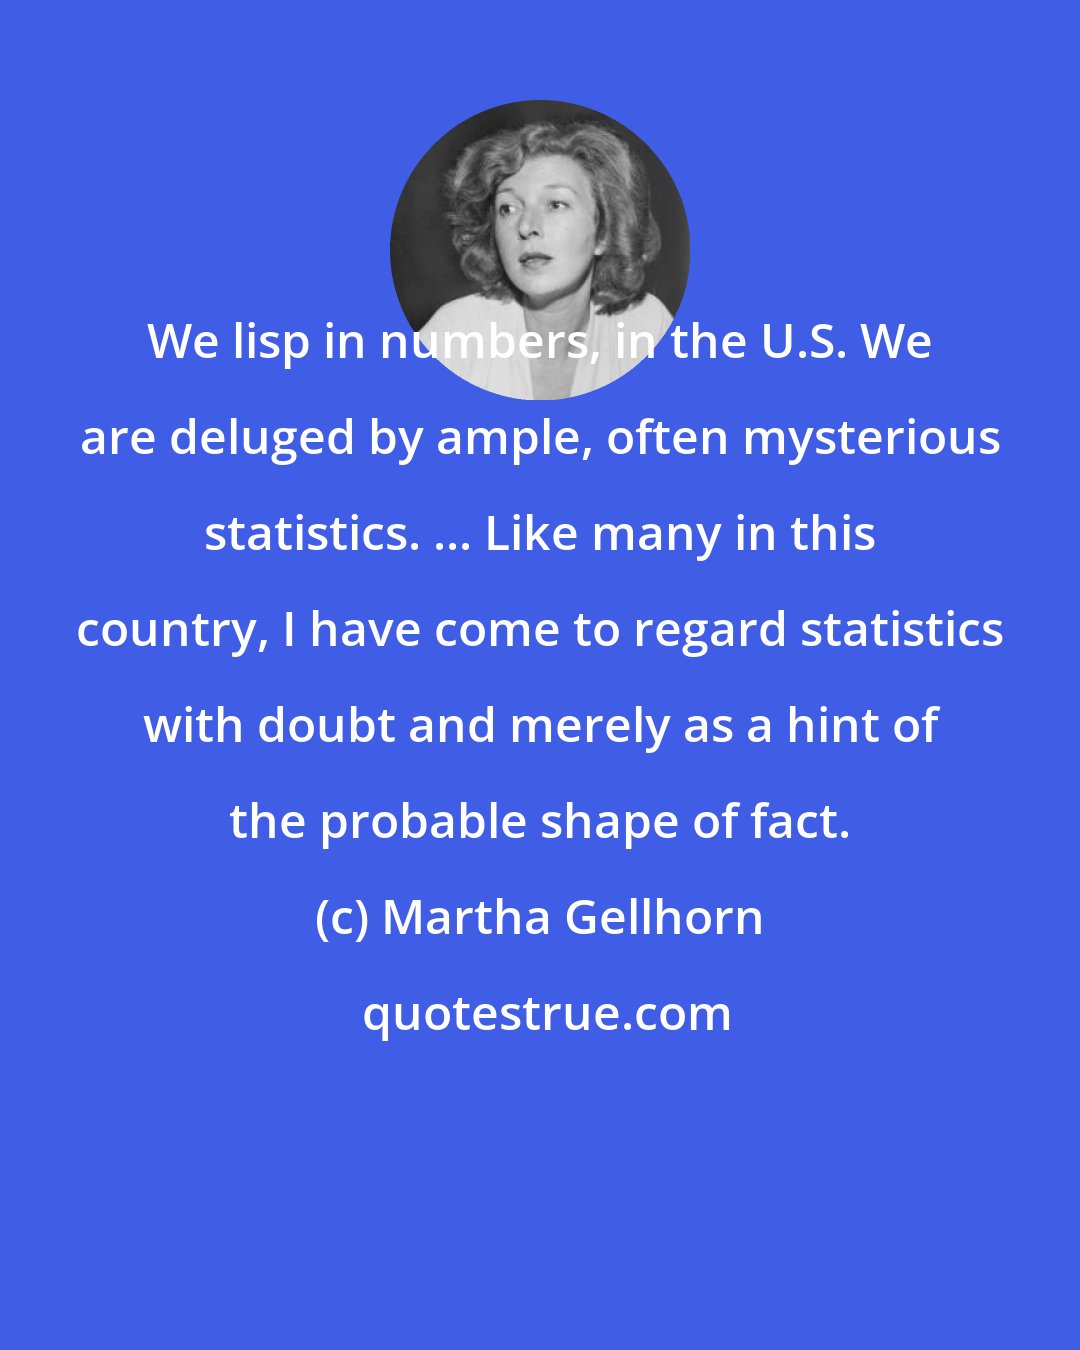 Martha Gellhorn: We lisp in numbers, in the U.S. We are deluged by ample, often mysterious statistics. ... Like many in this country, I have come to regard statistics with doubt and merely as a hint of the probable shape of fact.